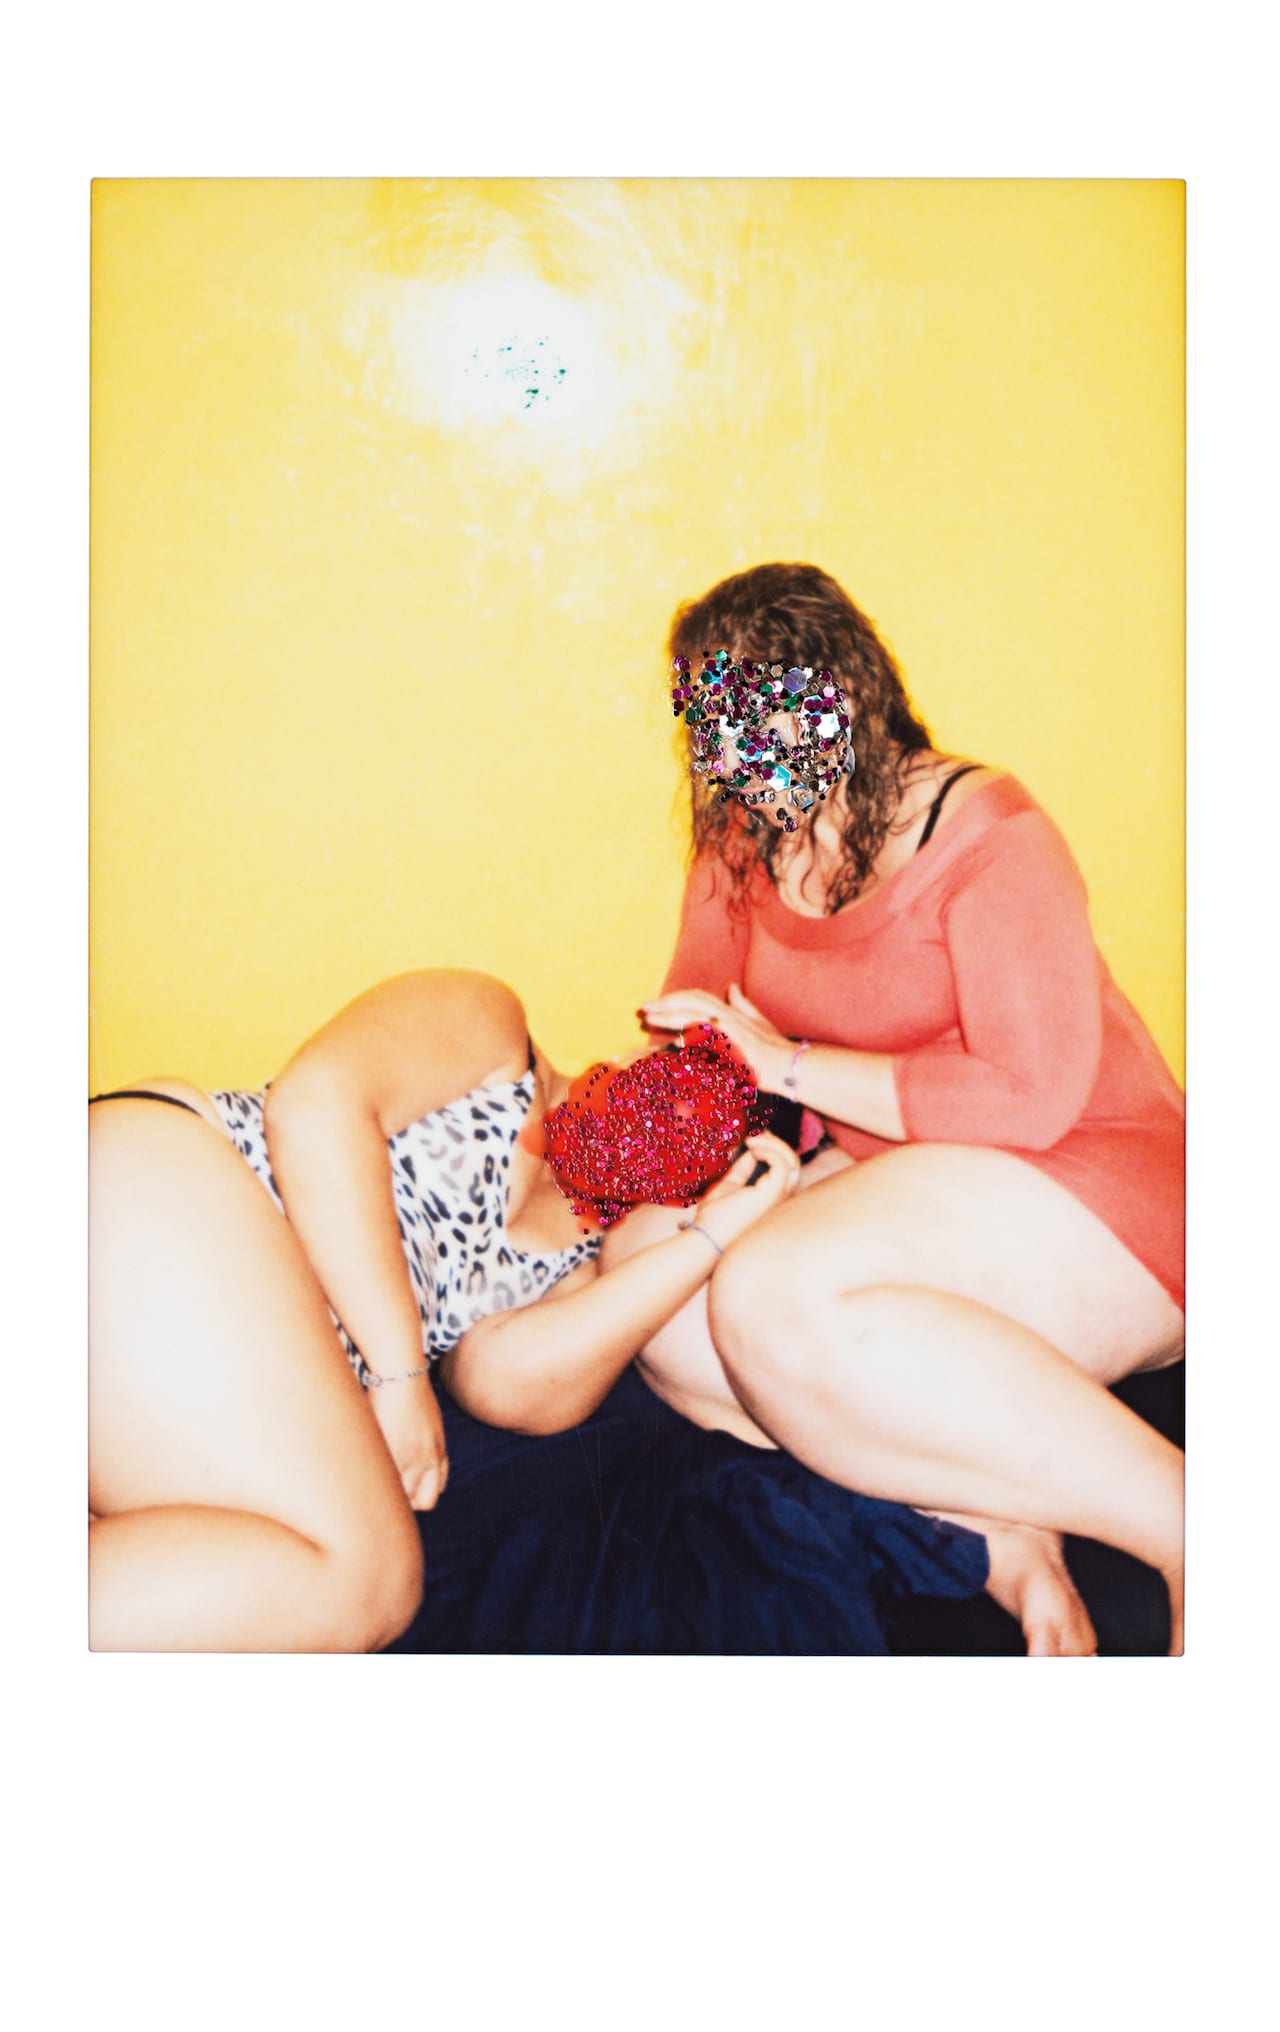 Nail polish and polaroids Charlotte Schmitz collaborates with sex workers 